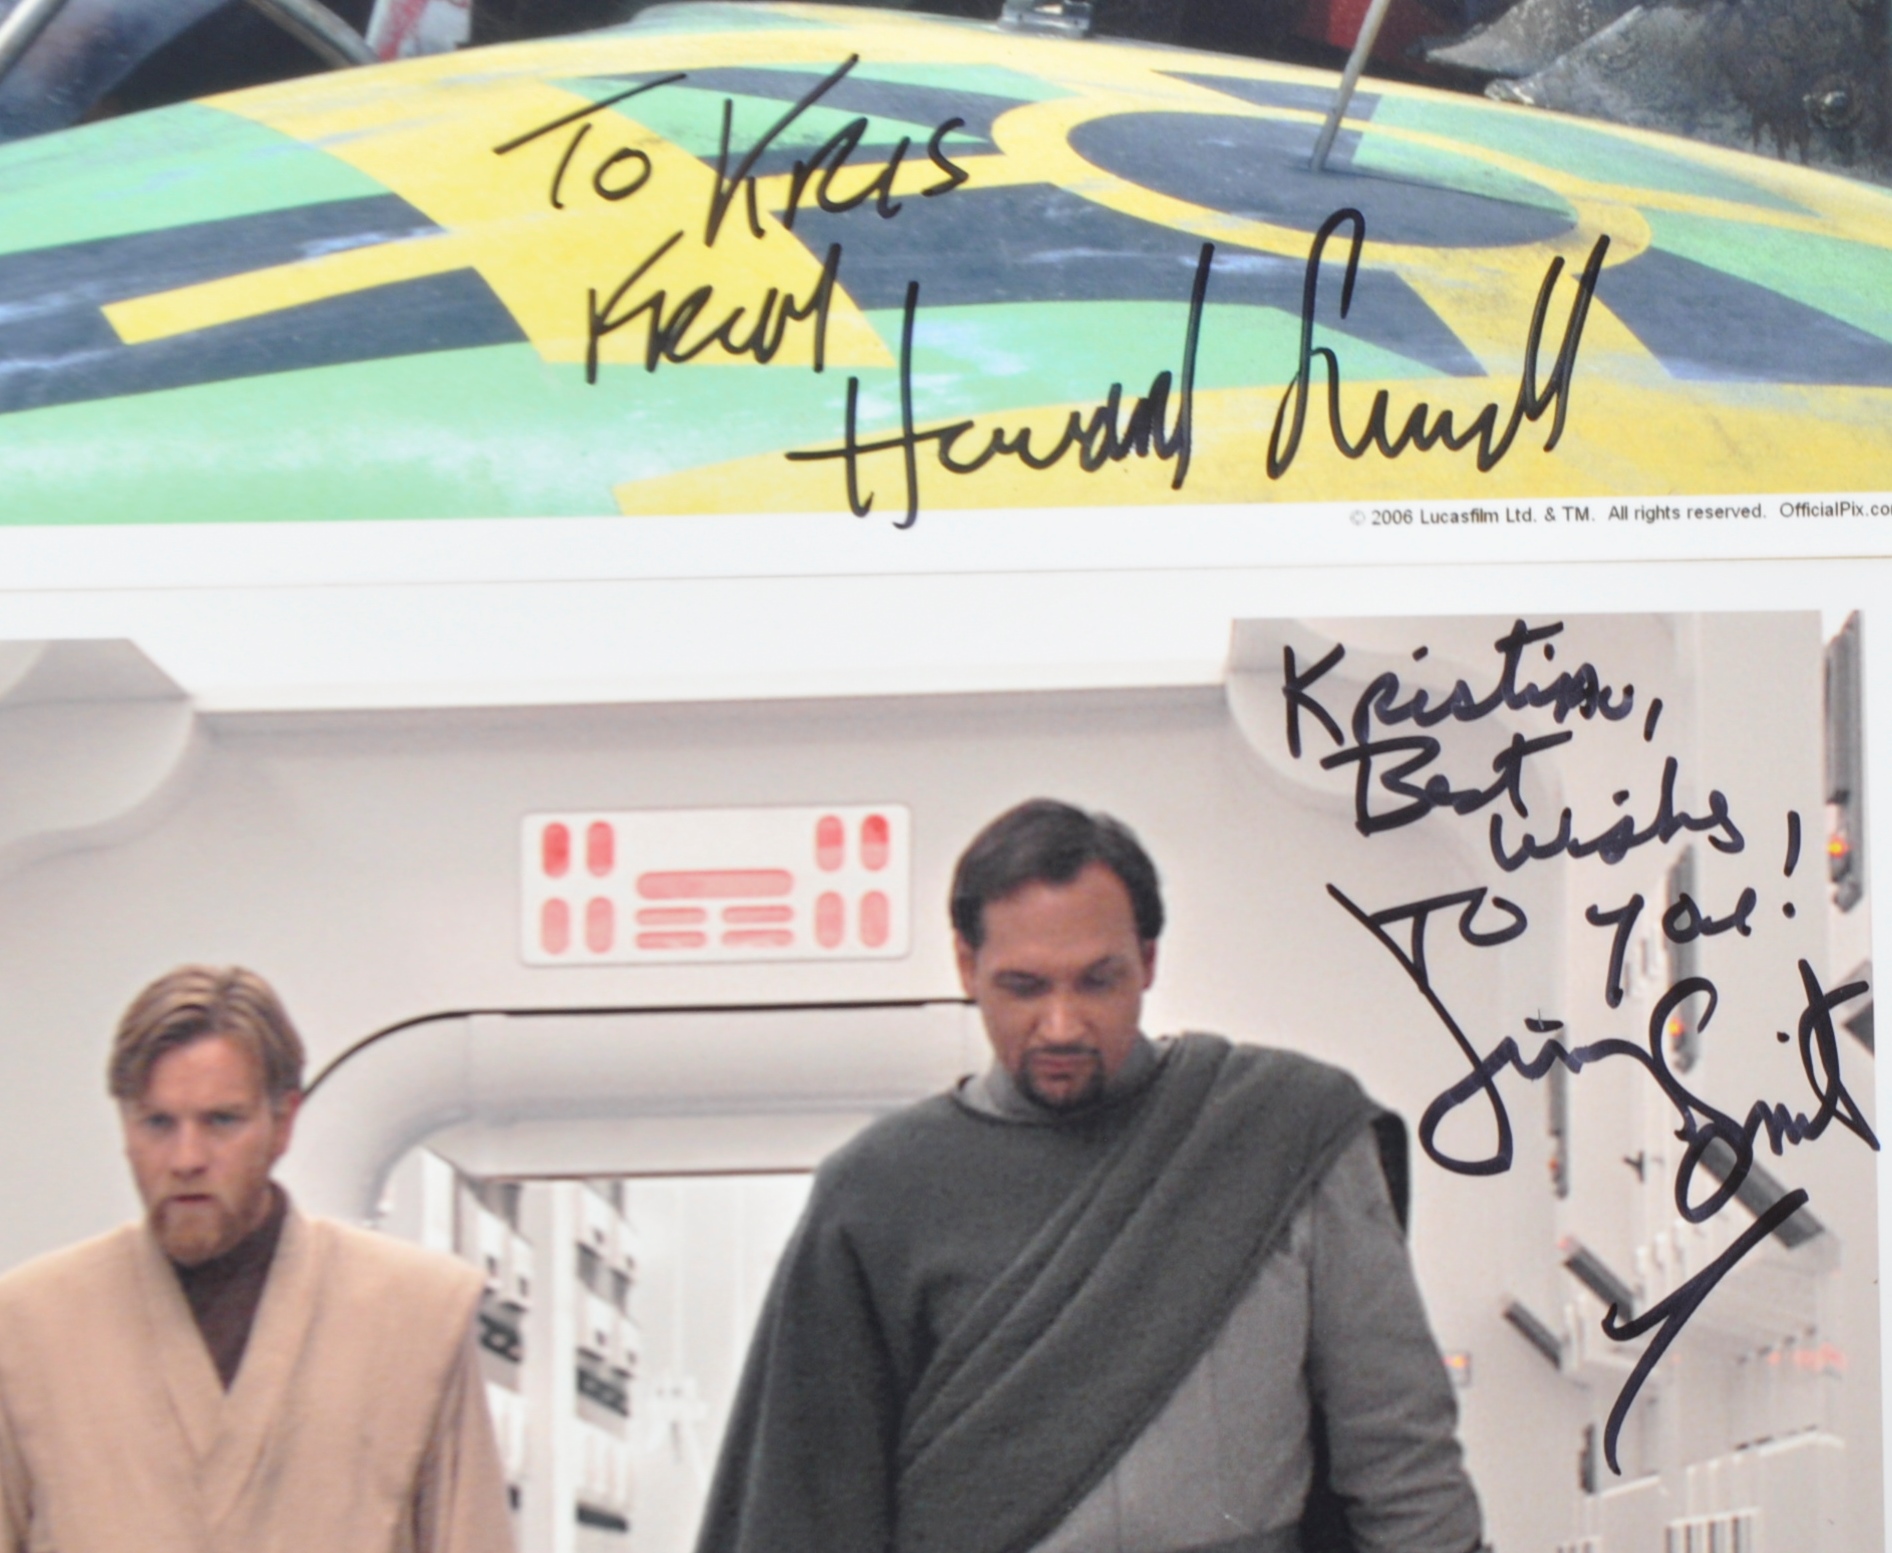 STAR WARS - THE PHANTOM MENACE - SIGNED OFFICIAL PIX COLLECTION - Image 4 of 8